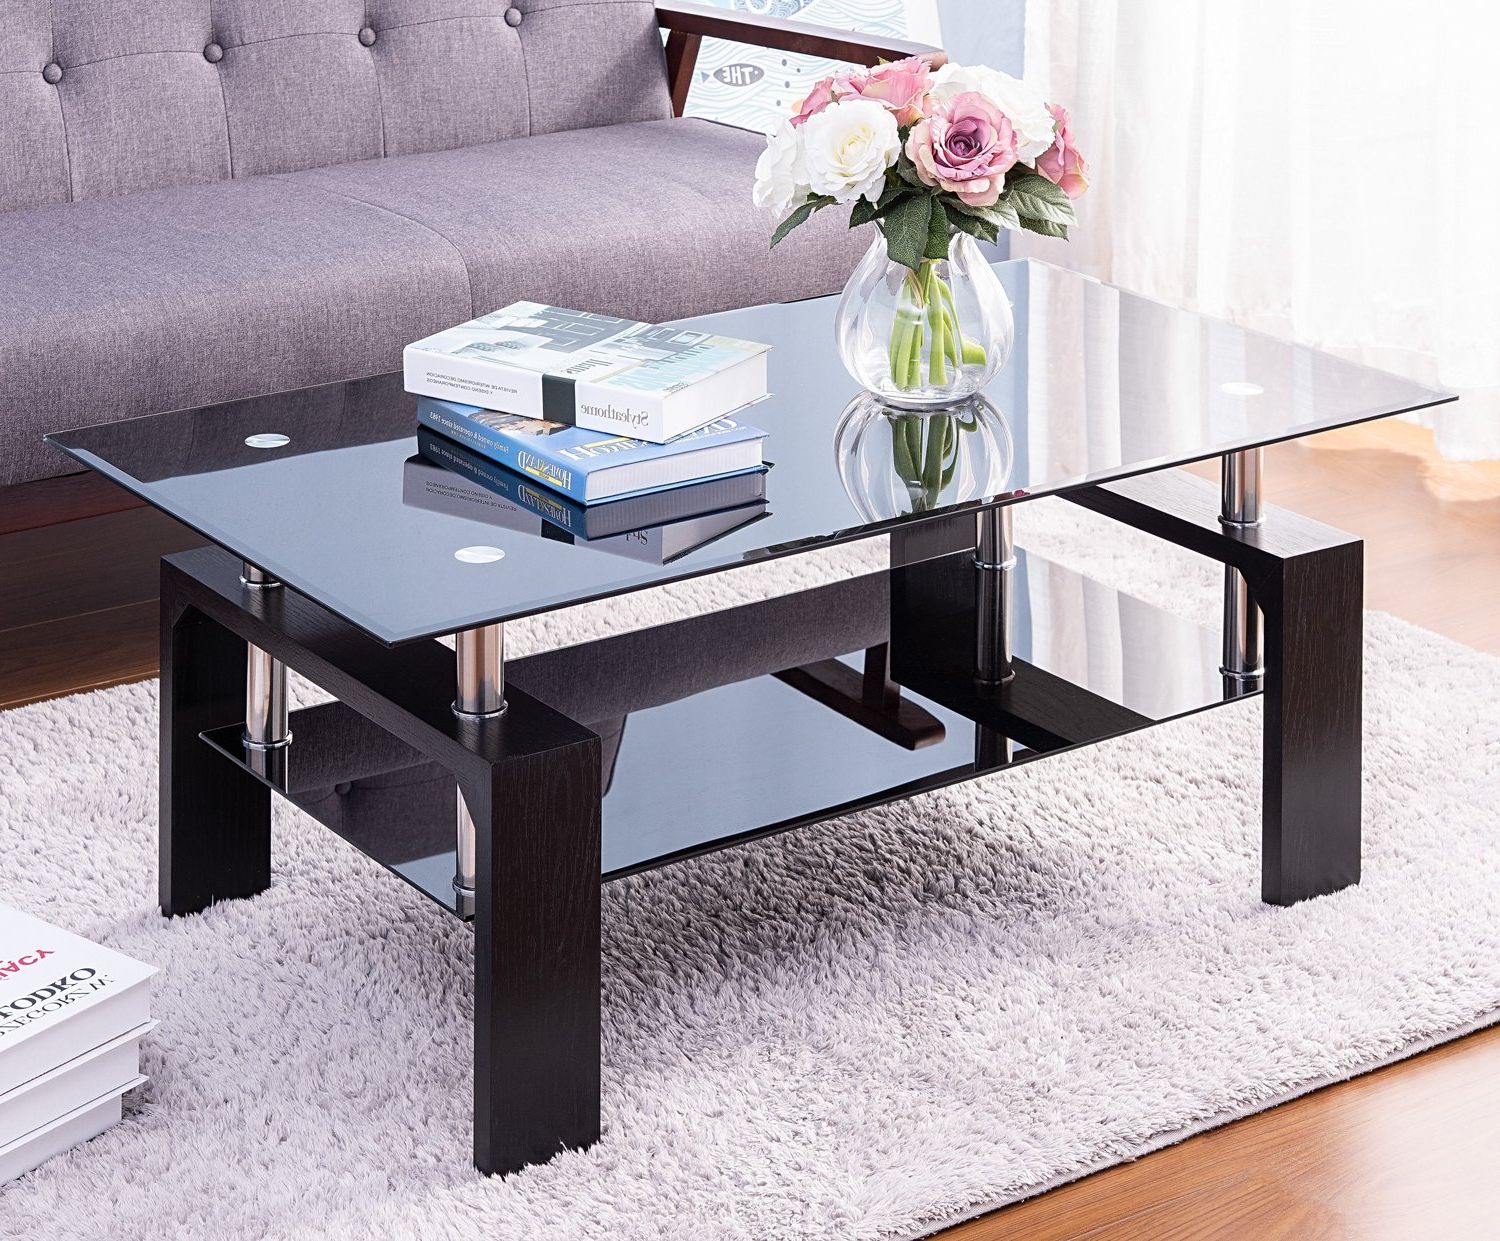 2019 Glass Coffee Table For Living Room, Modern Rectangle Pertaining To Espresso Wood And Glass Top Coffee Tables (View 2 of 20)